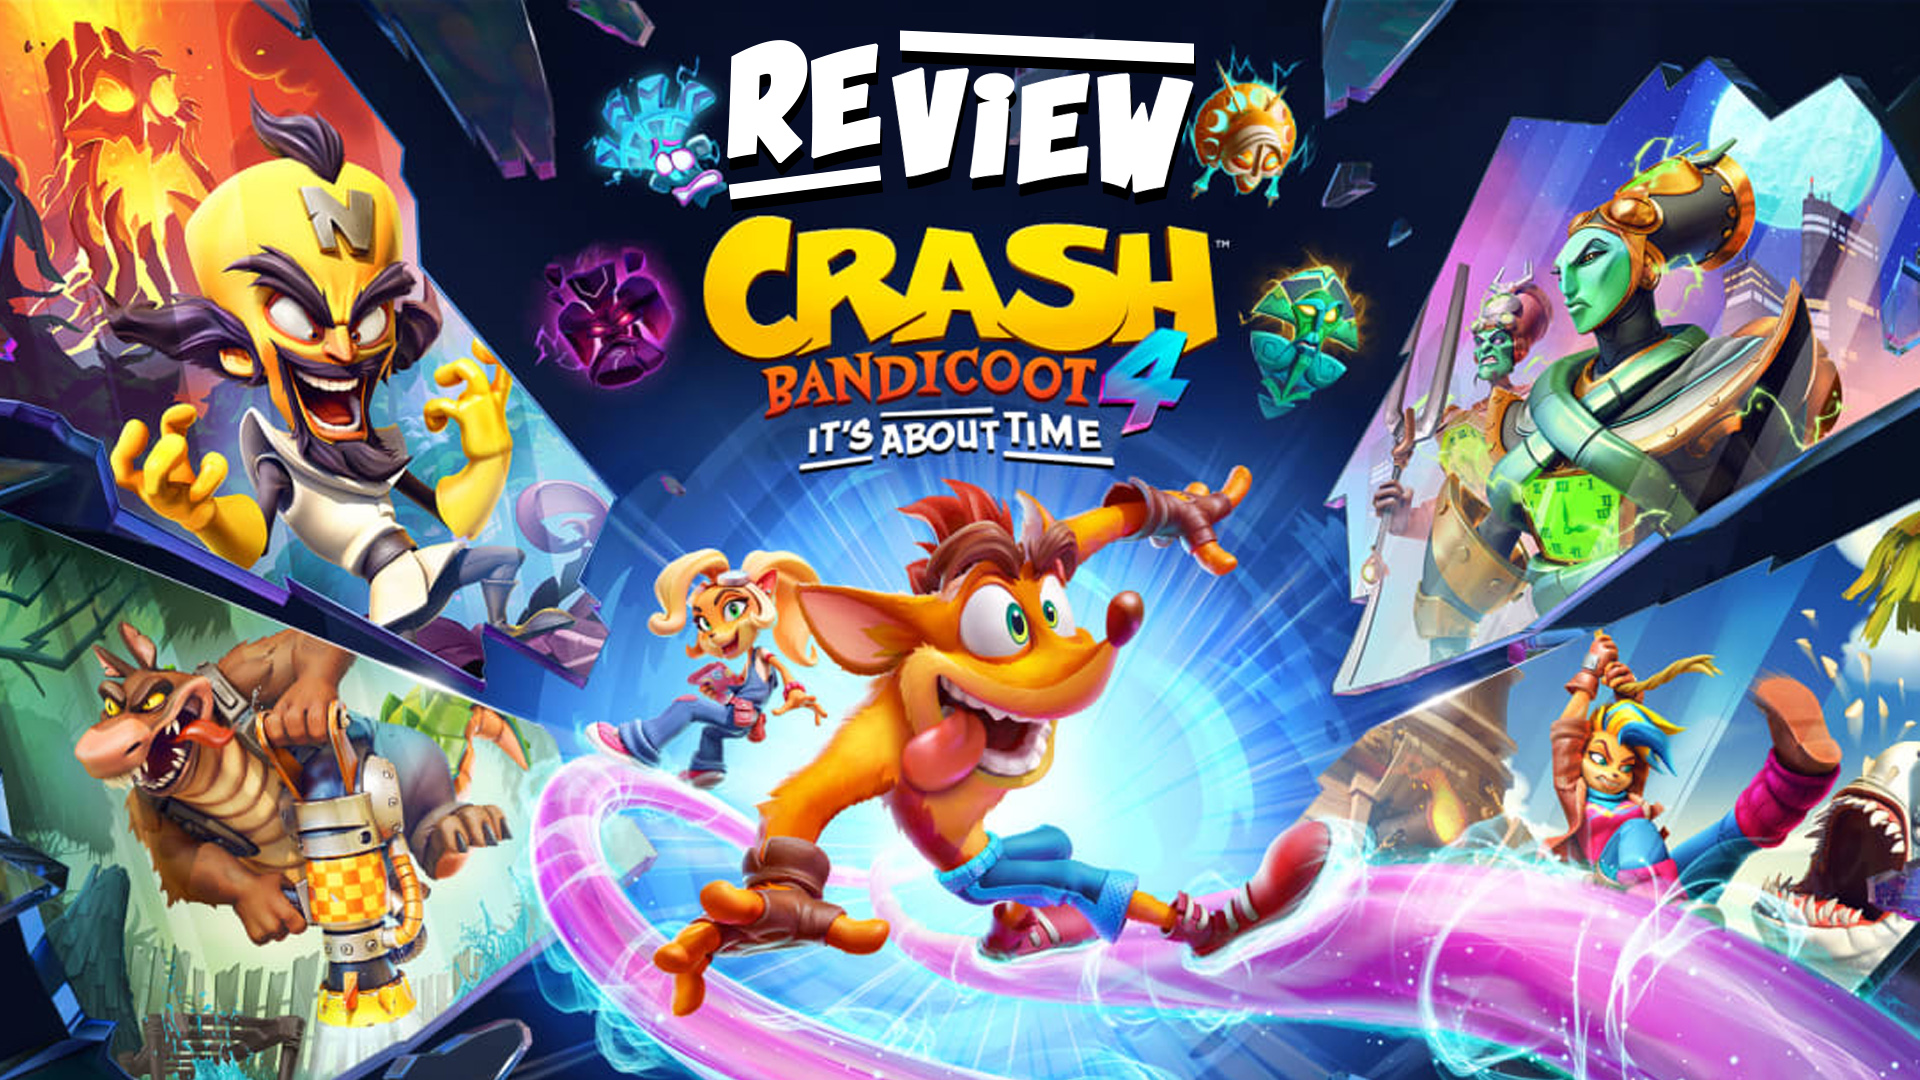 Crash Bandicoot 4: It's About Time (Game Review) - Forts and Fairies